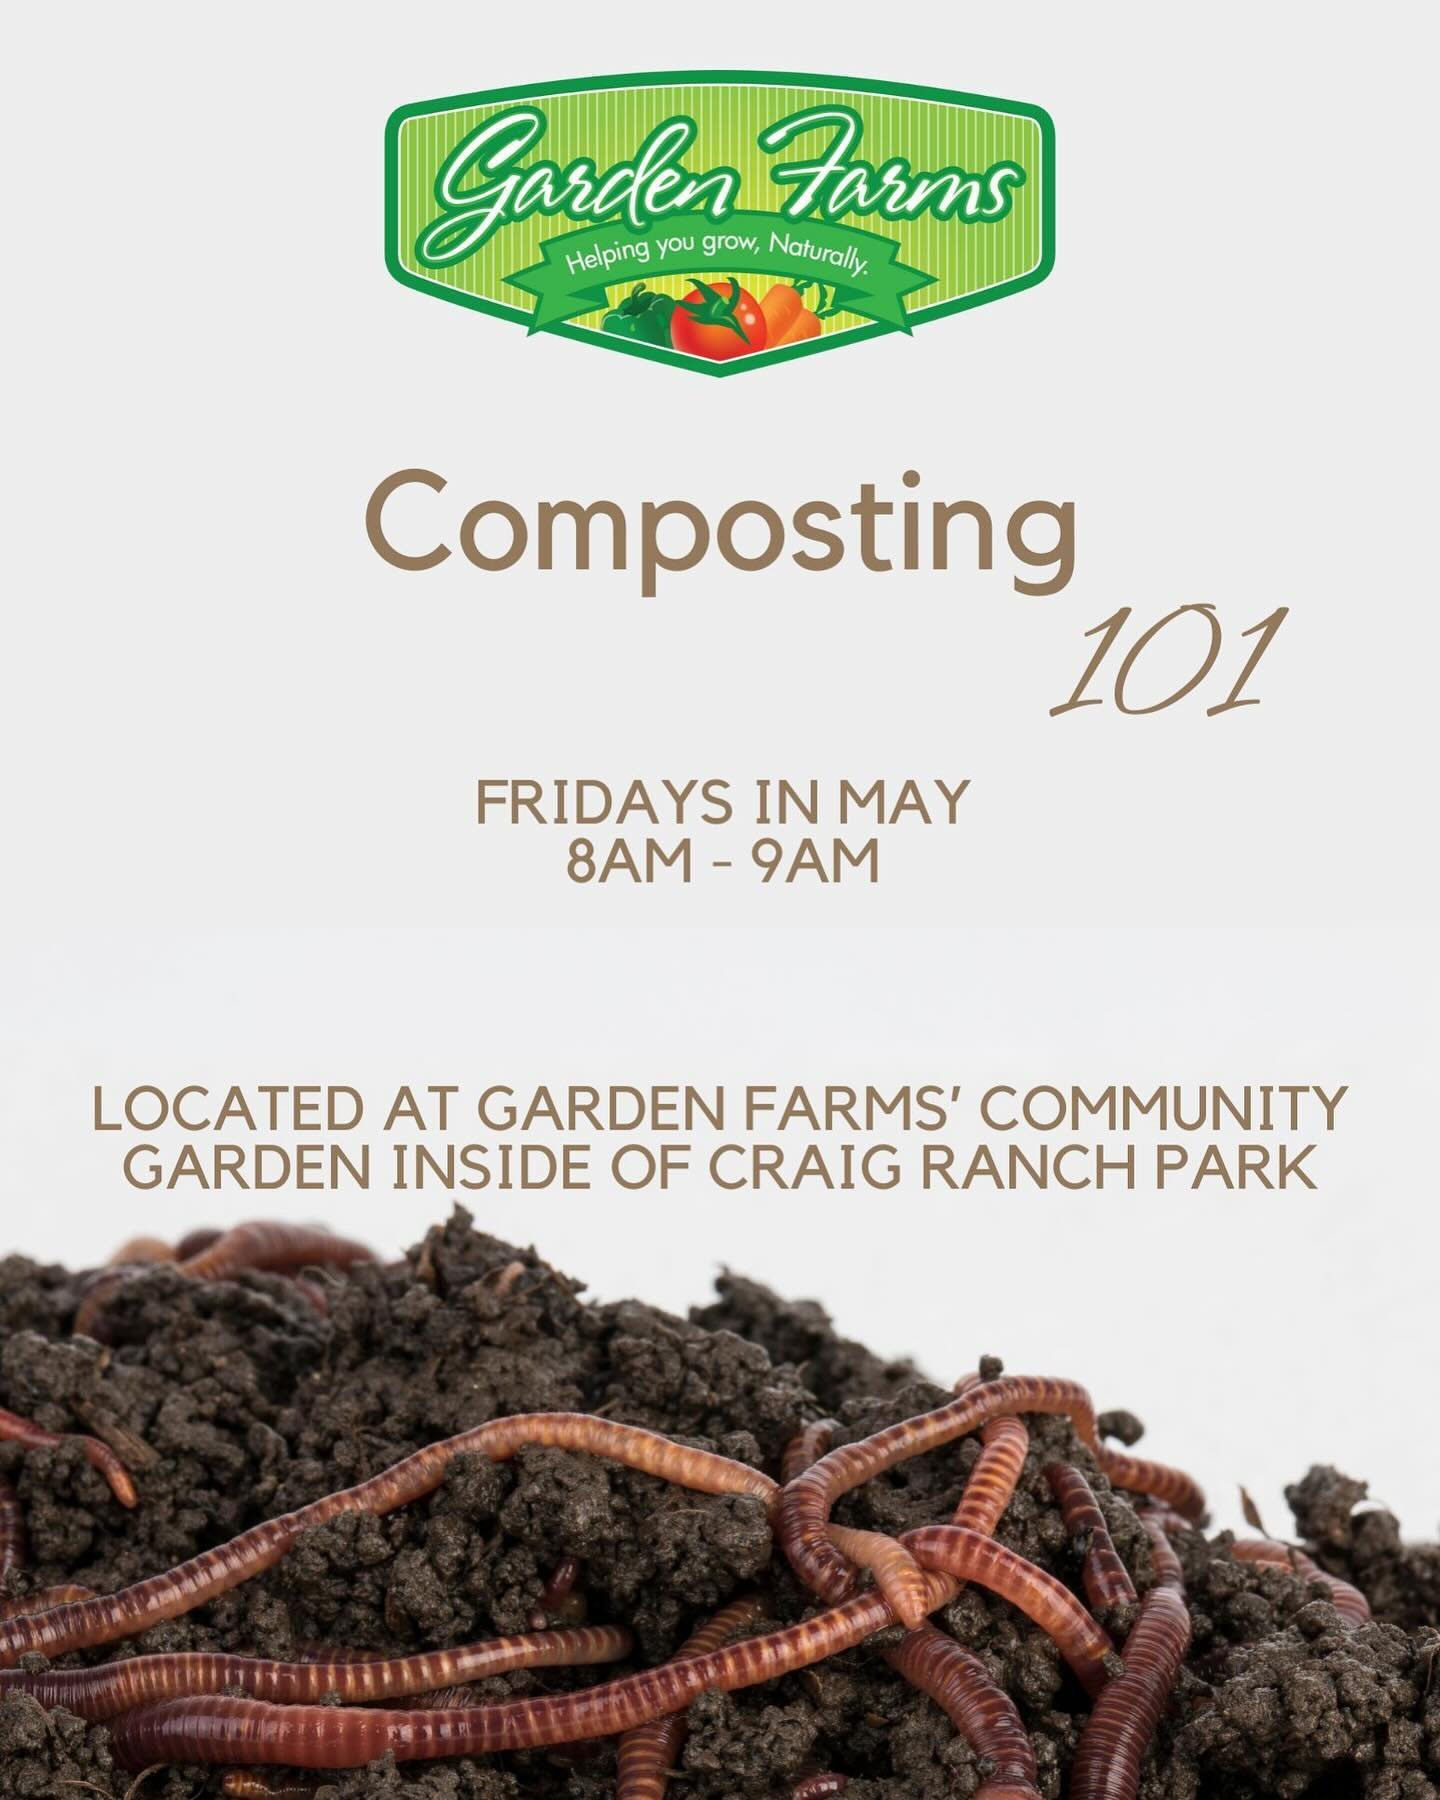 Learn to grow with the pros when you sign up for Garden Farms Academy 📚

COMPOSTING 101🪱

Fridays in May

8am-9am

**** $6 per person****
 Register for class by visiting our website!

Located at Garden Farms Community Garden inside of Craig Ranch R